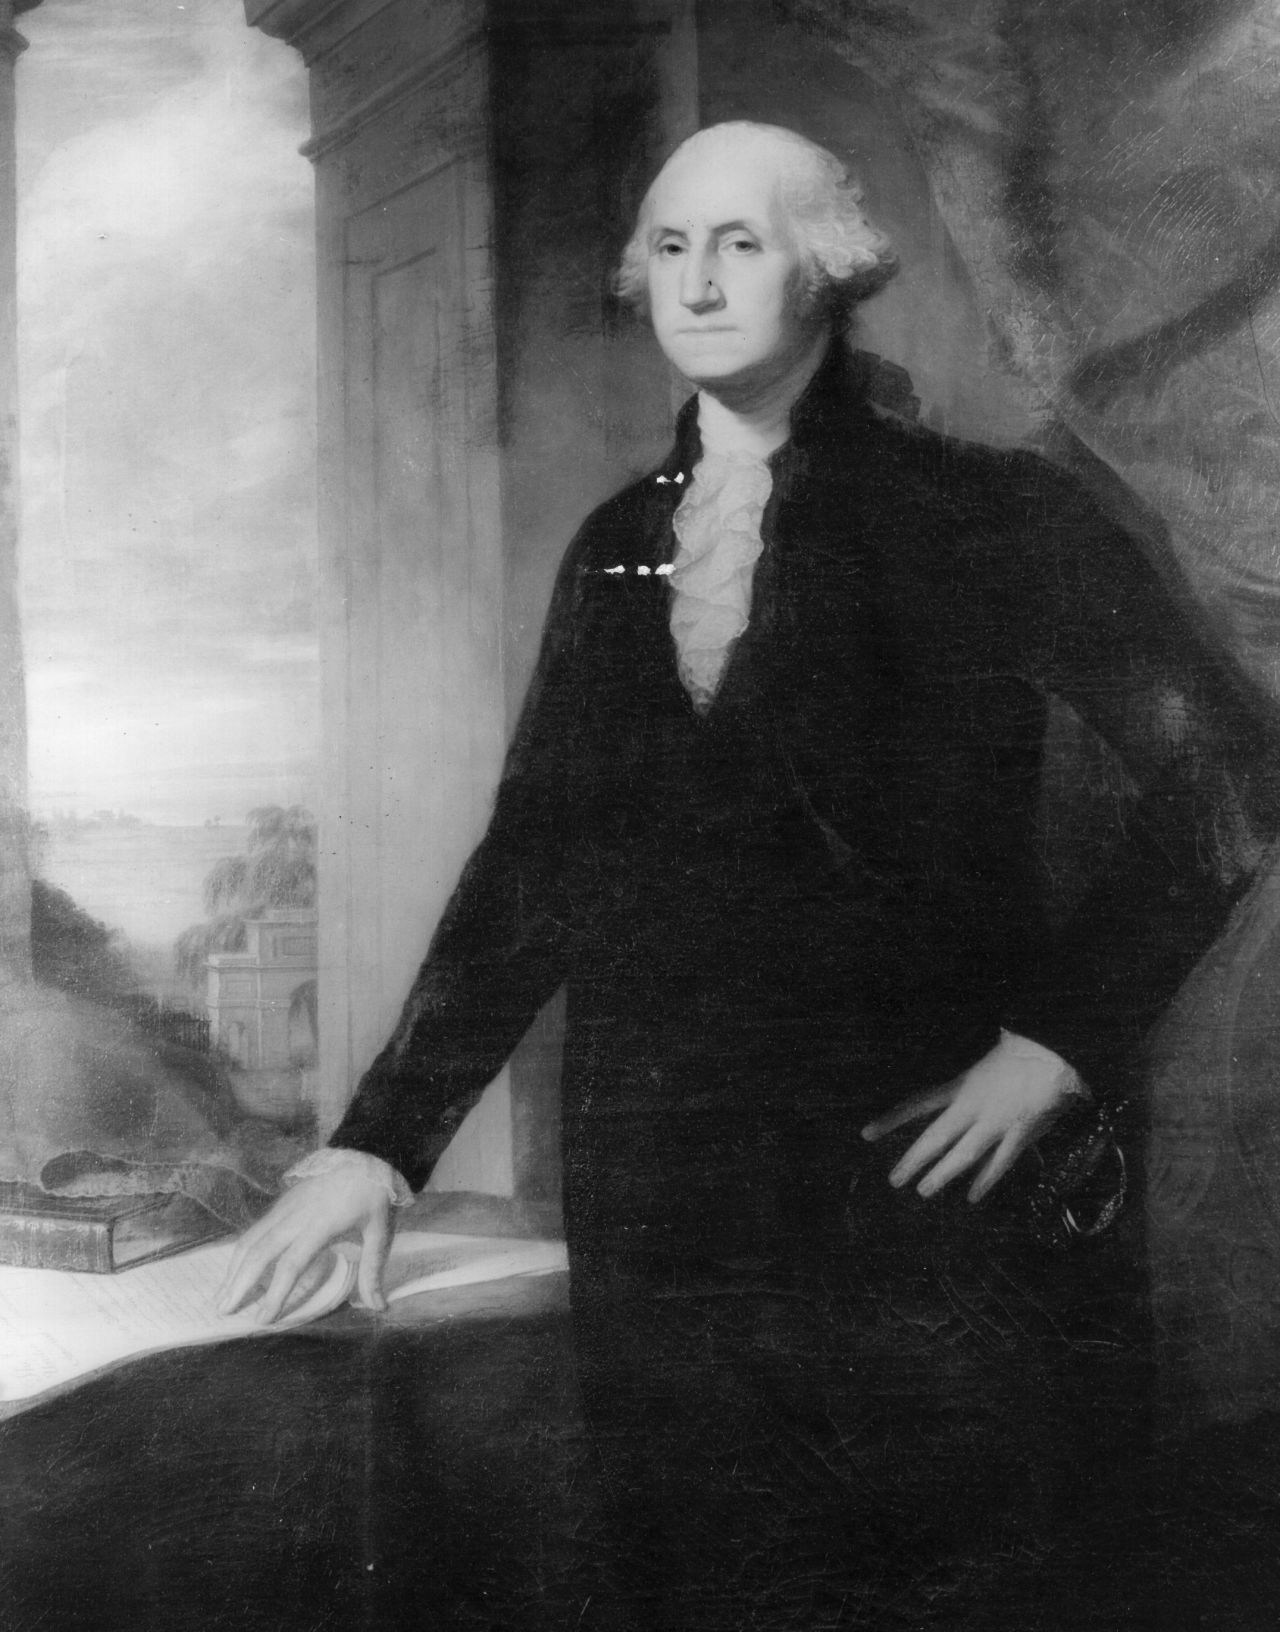 Many of the nation's early presidents were successful businessmen as well as political leaders. George Washington was a wealthy landowner who took an active role in managing his vast estate before leading the Continental Army. 